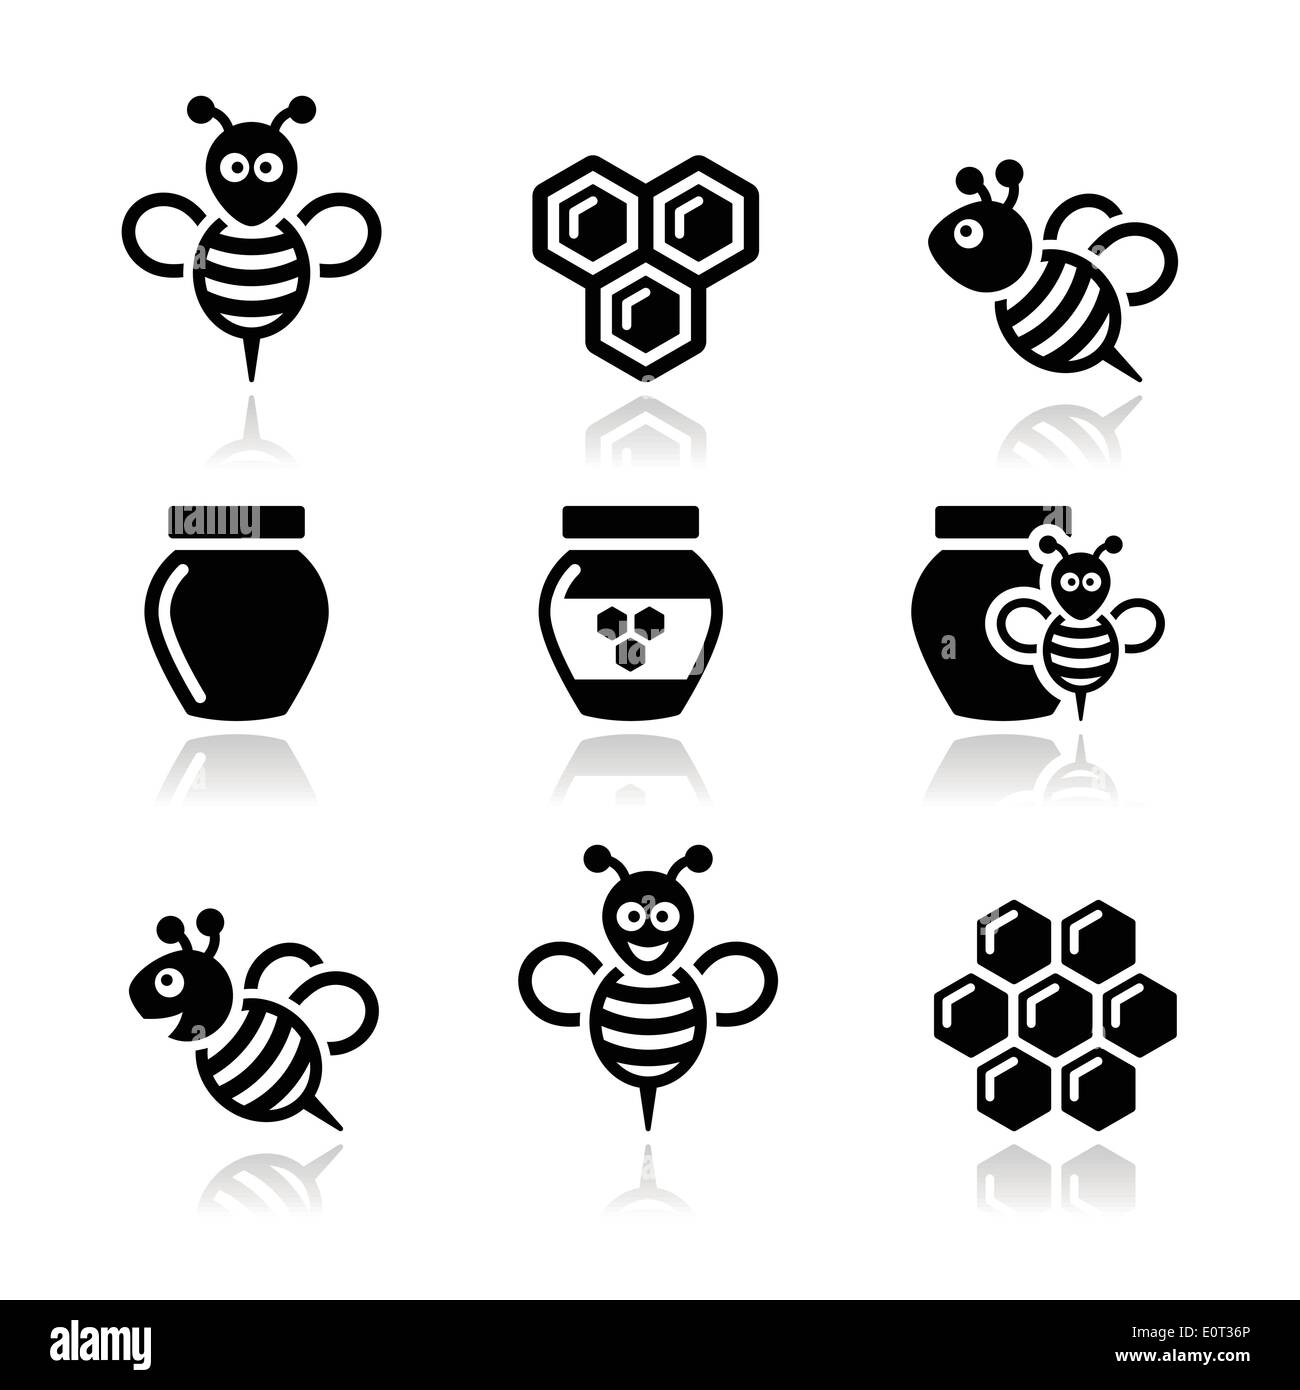 Bee and honey vector icons set Stock Vector